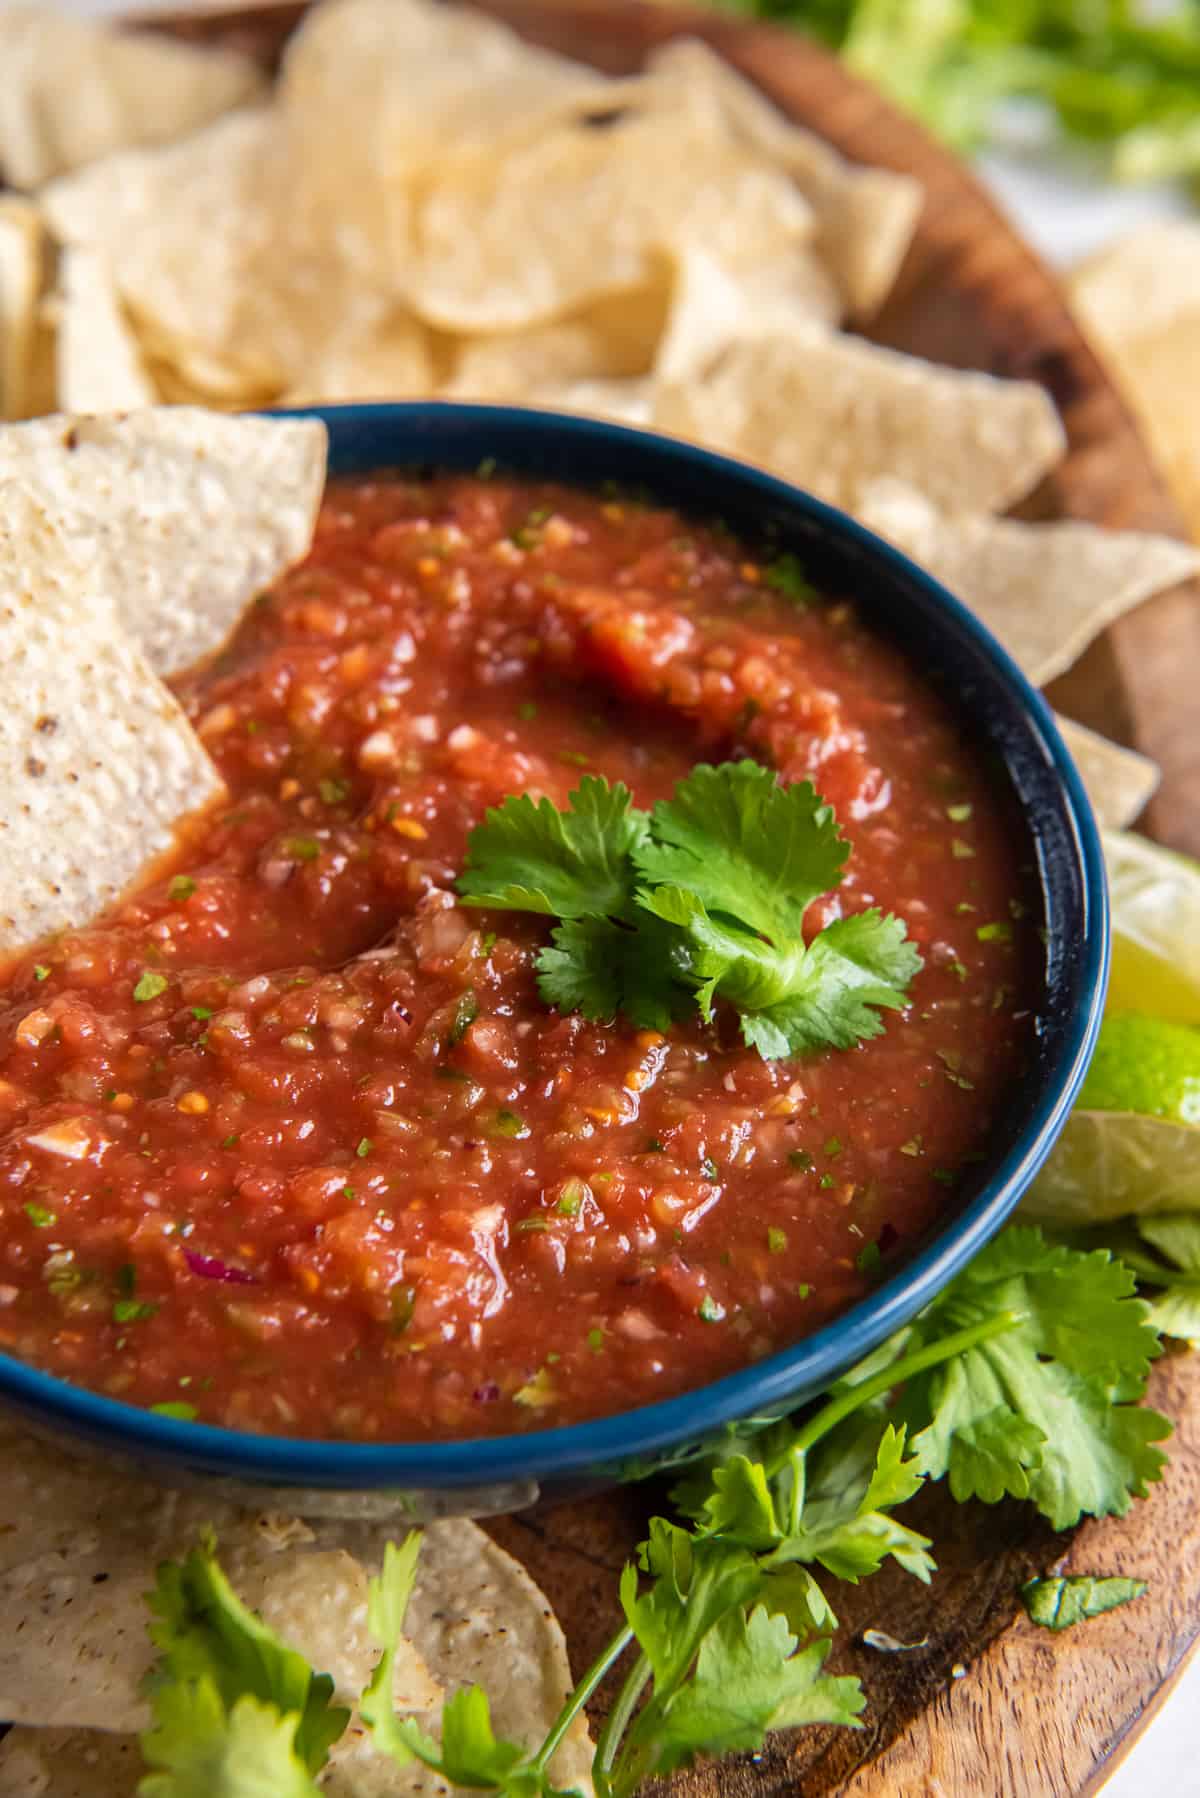 Salsa in a bowl with tortilla chips and cilantro around it.